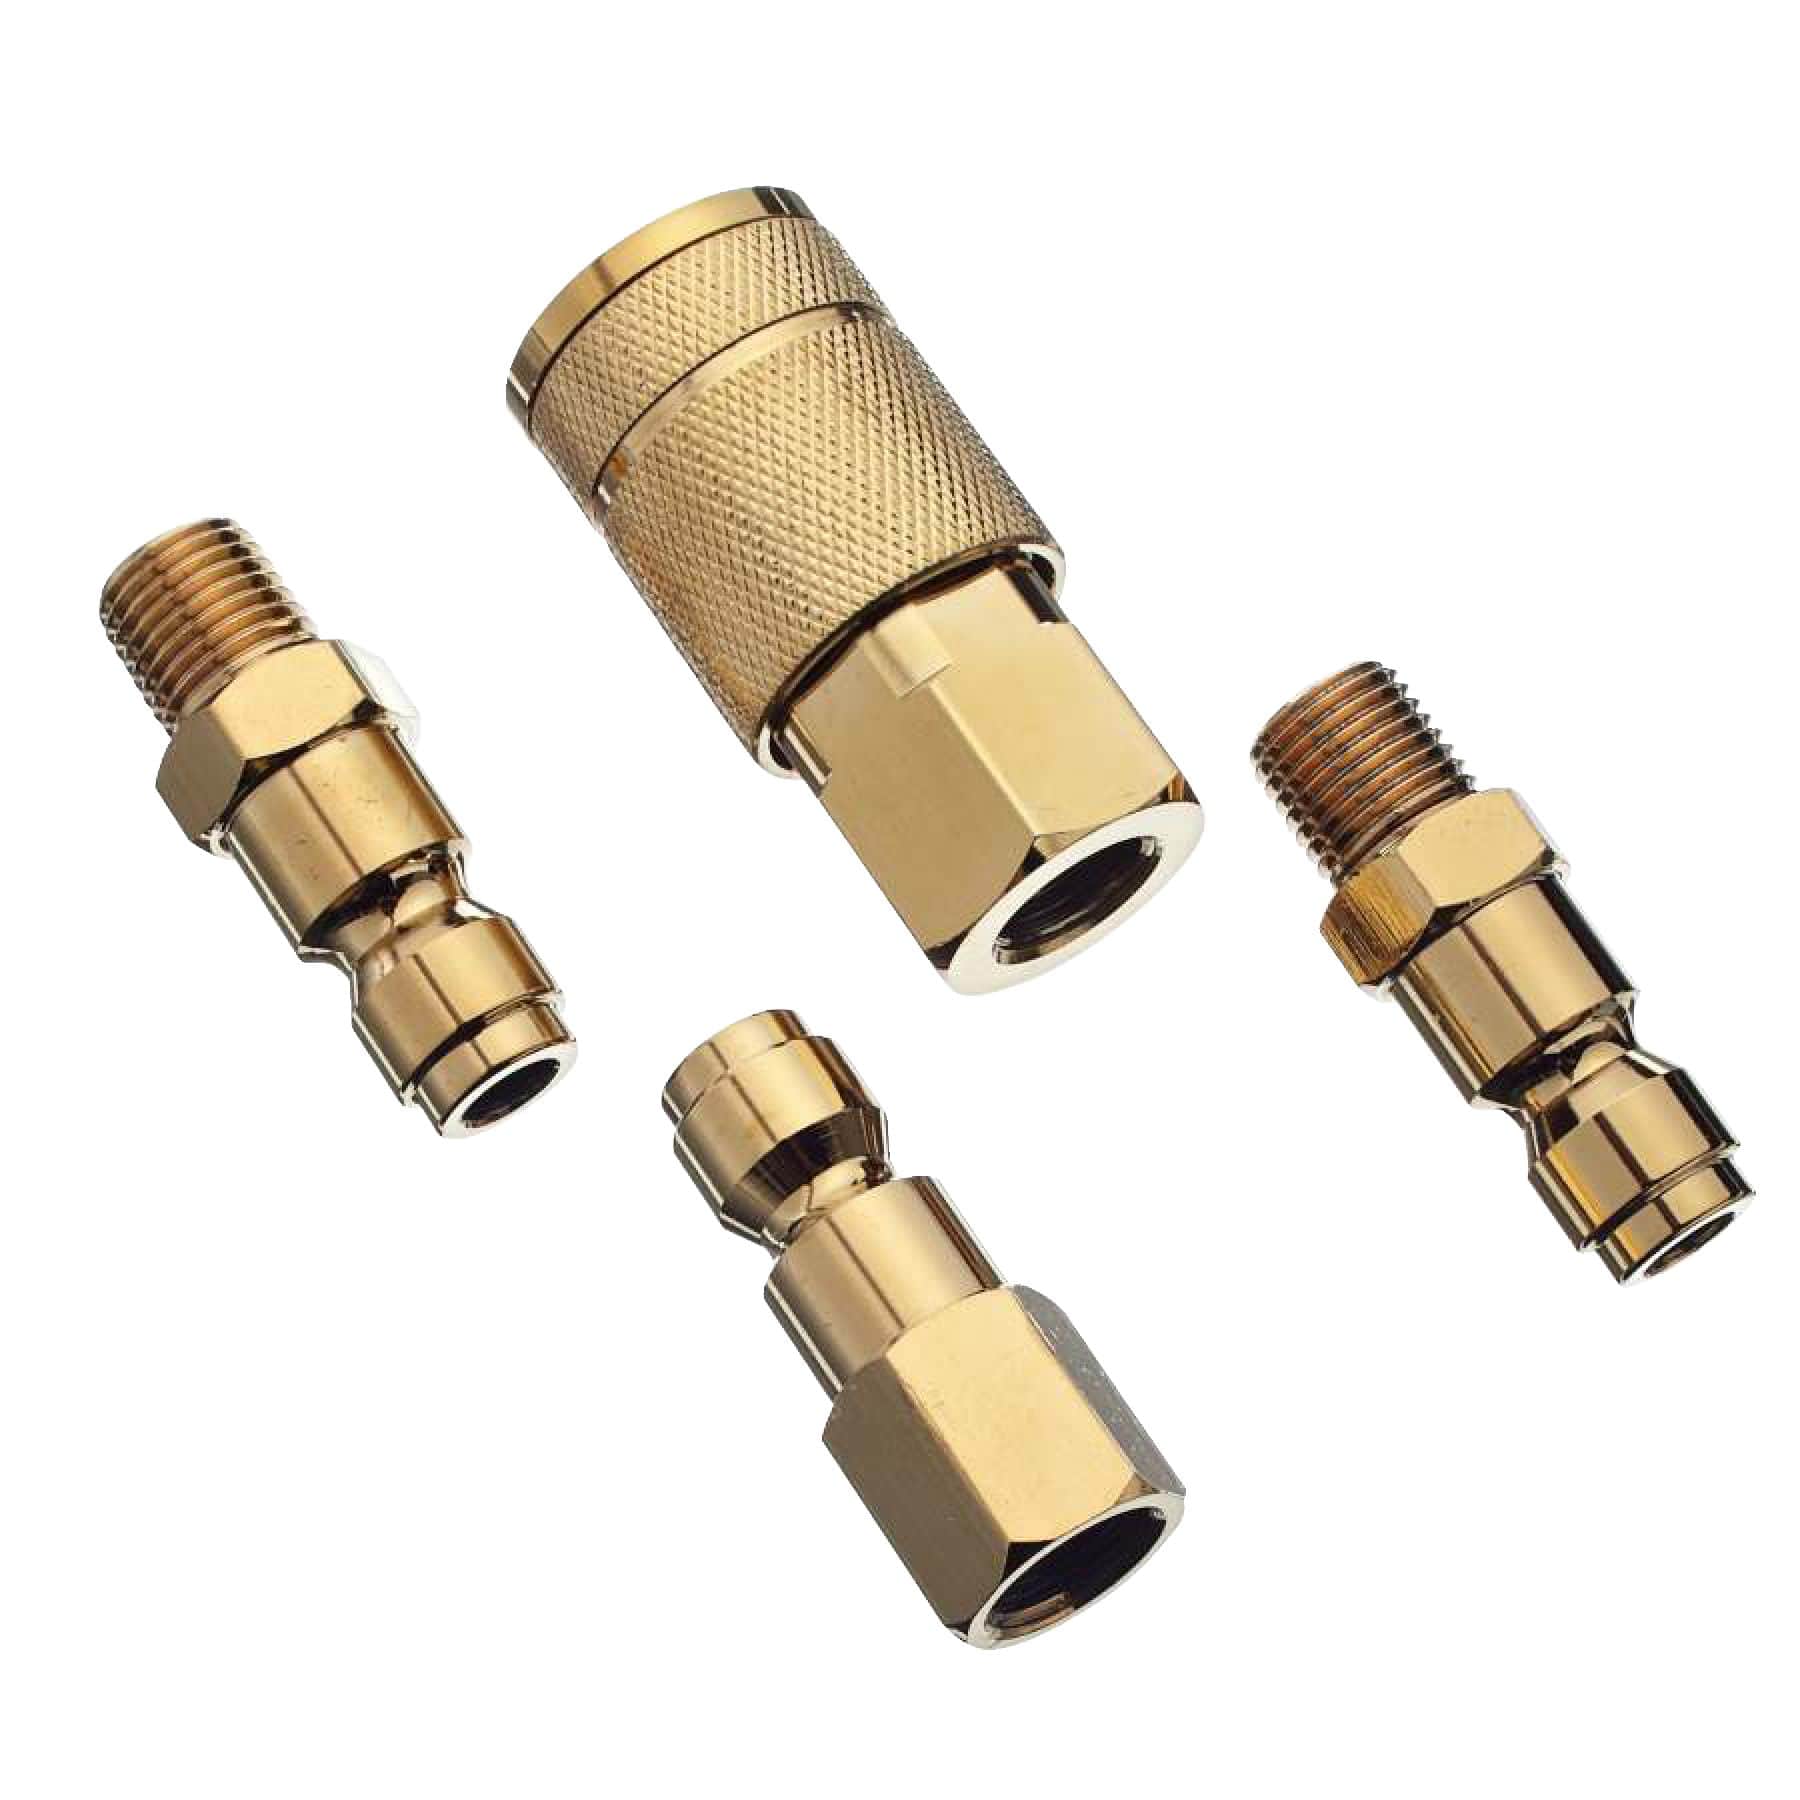 3/8 Indust. Ball Swivel Connector, 1/4 MPT, Display, 3/8 Indust. Ball Swivel  Connector, 1/4 MPT, Display